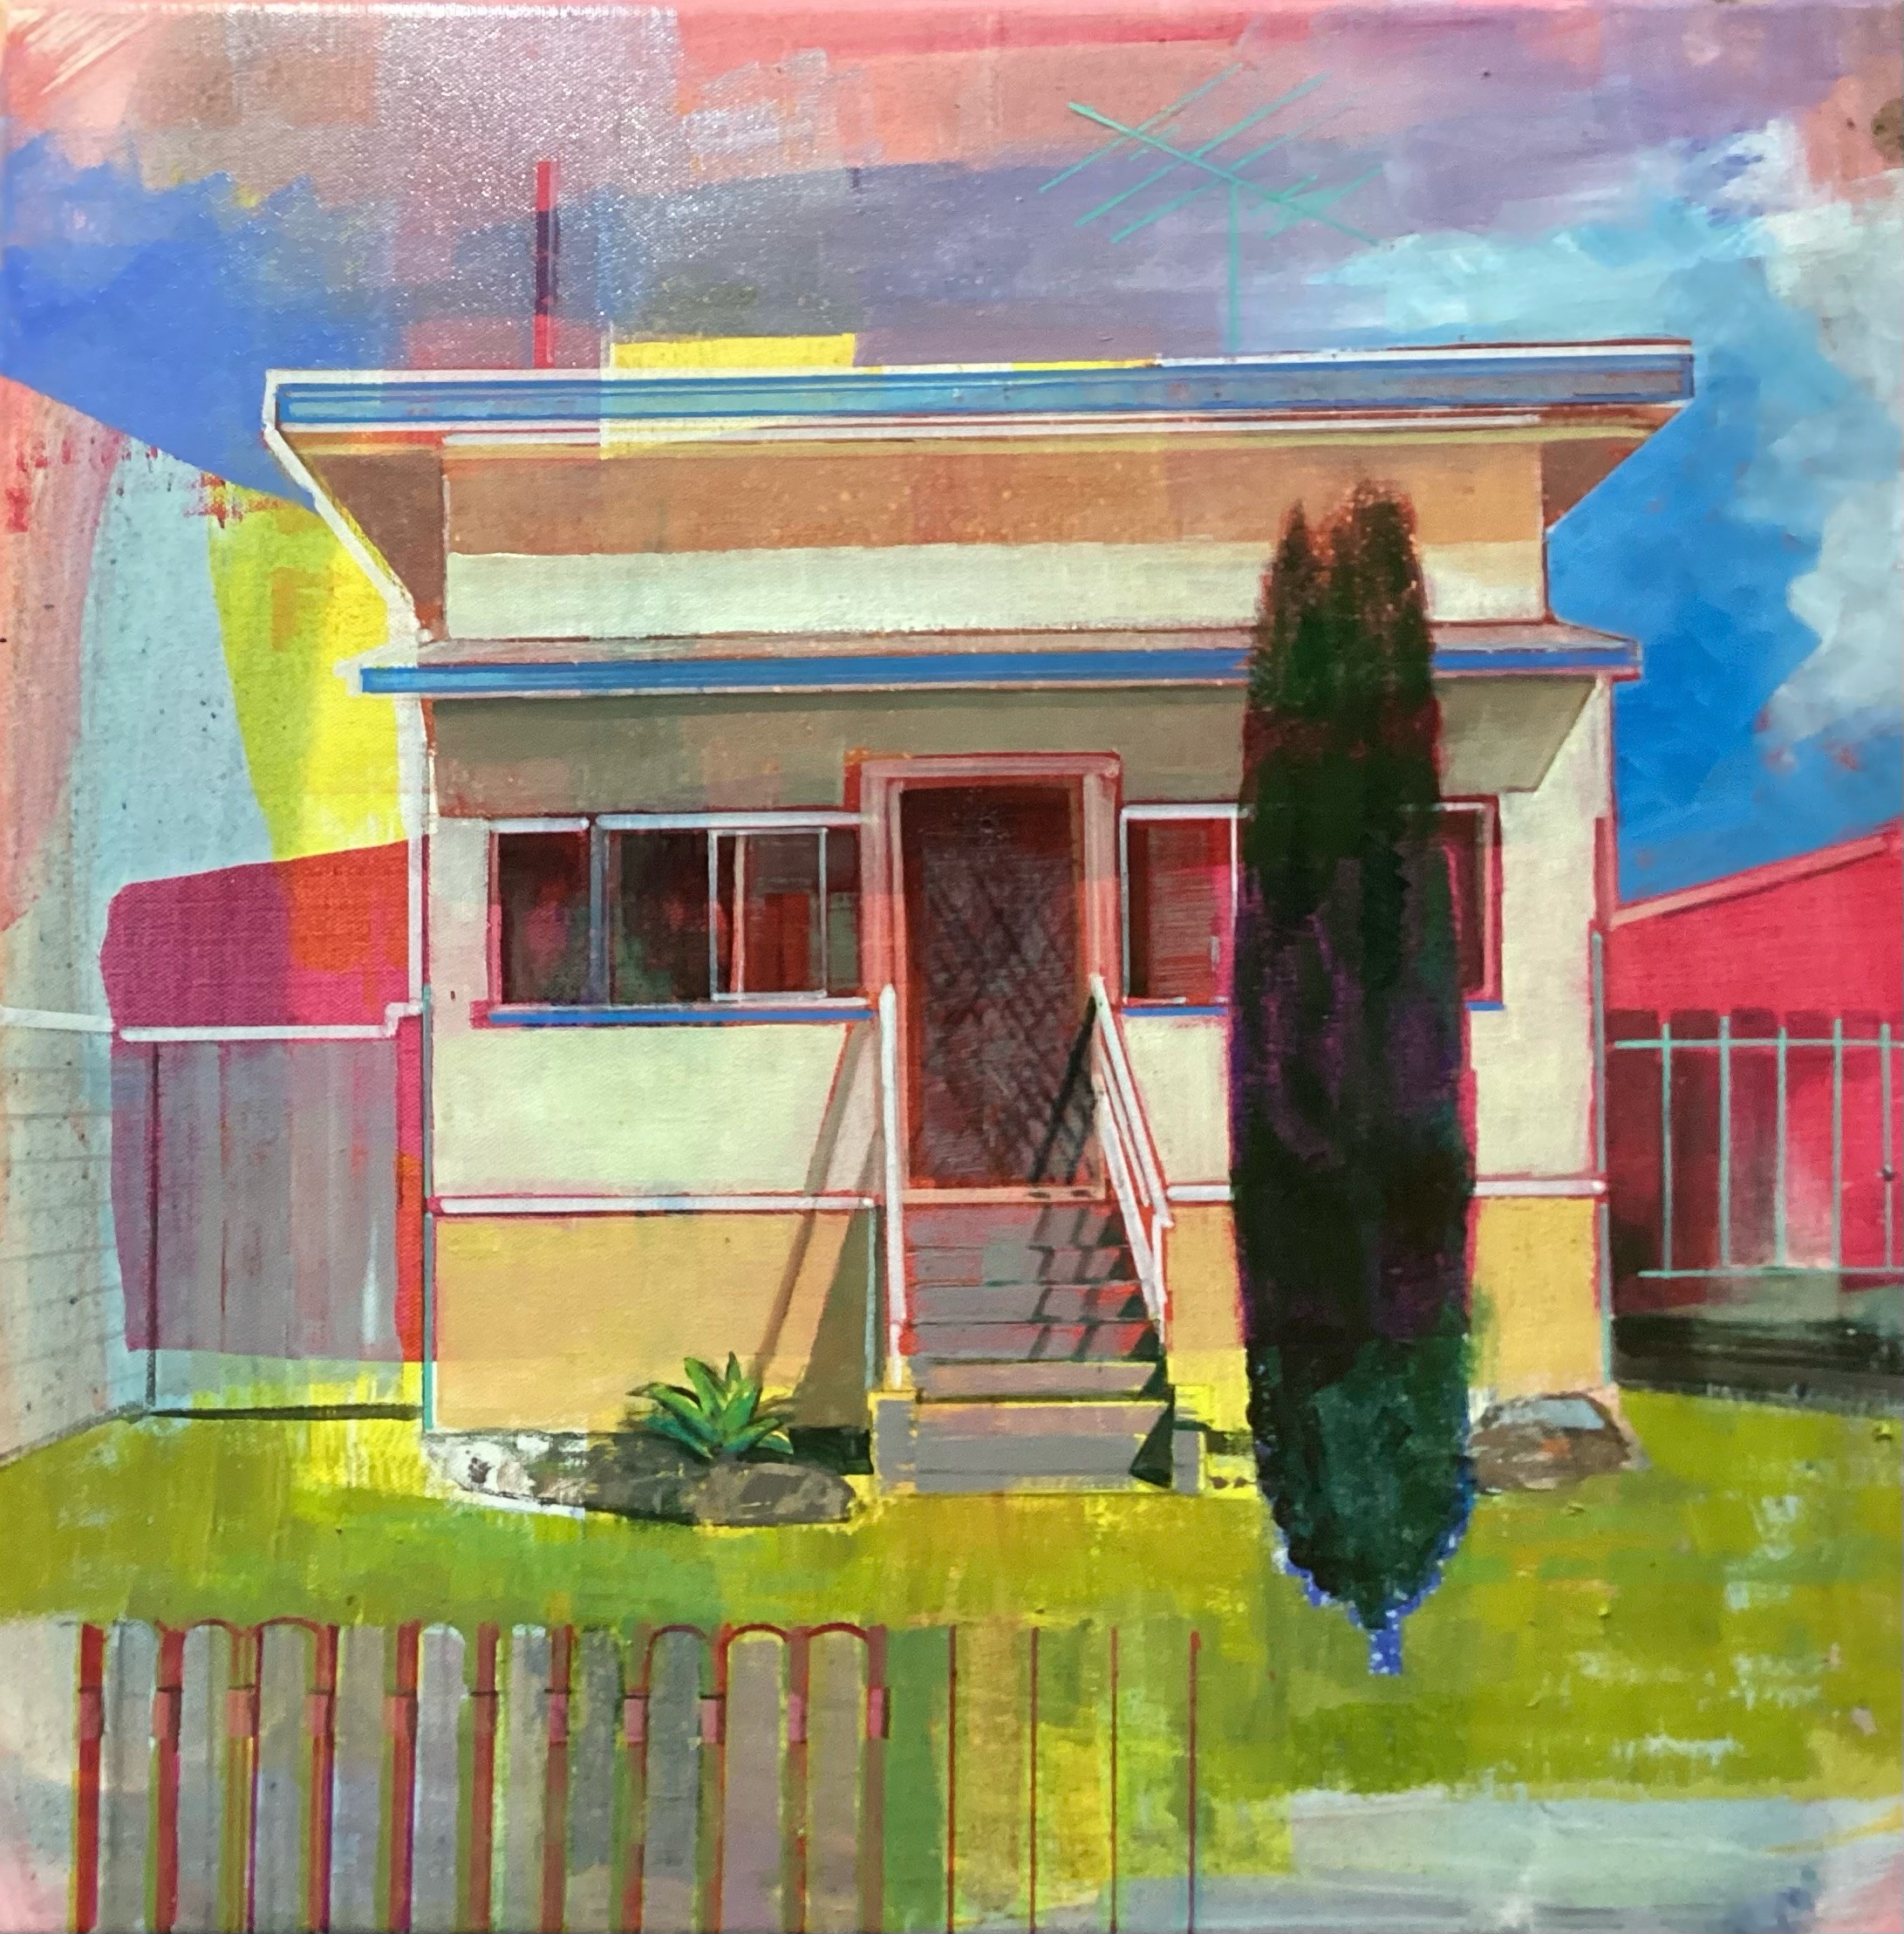 Nick Olsen 'House in the Sun' oil on canvas 50 x 50cm SOLD